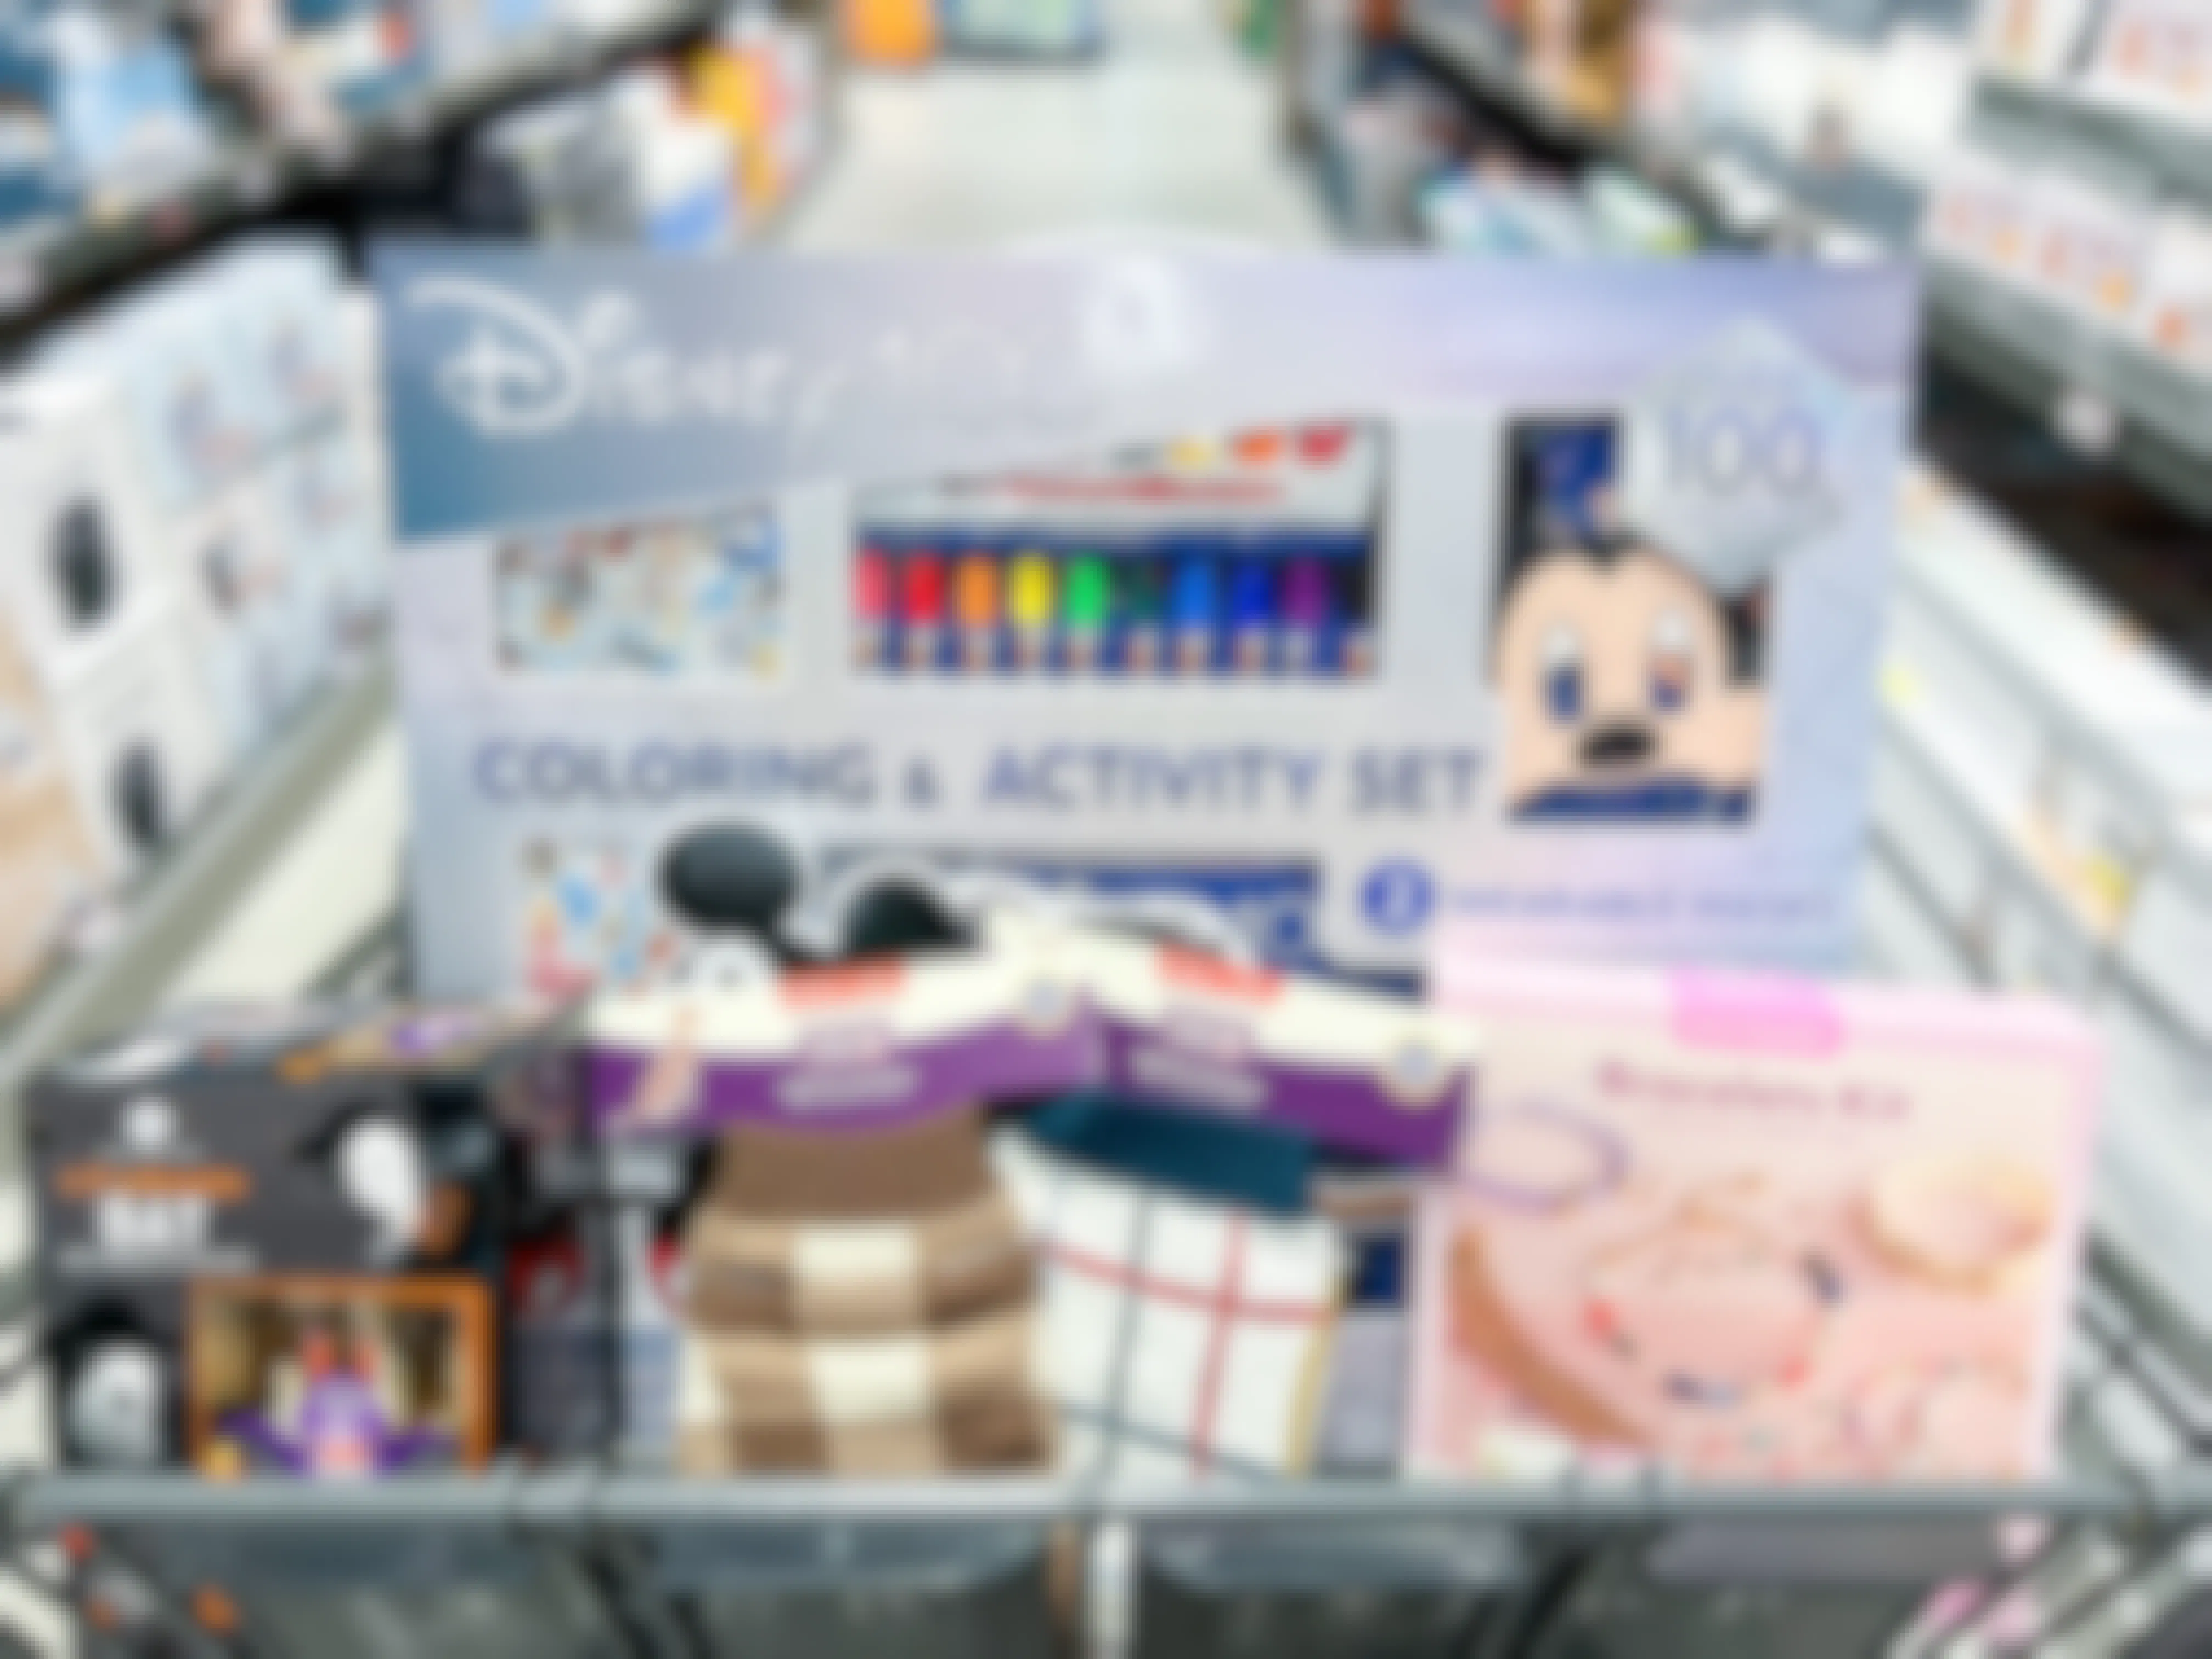 Latest Aldi Disney Finds We're Eyeing: 100-Piece Activity Sets for $7.99